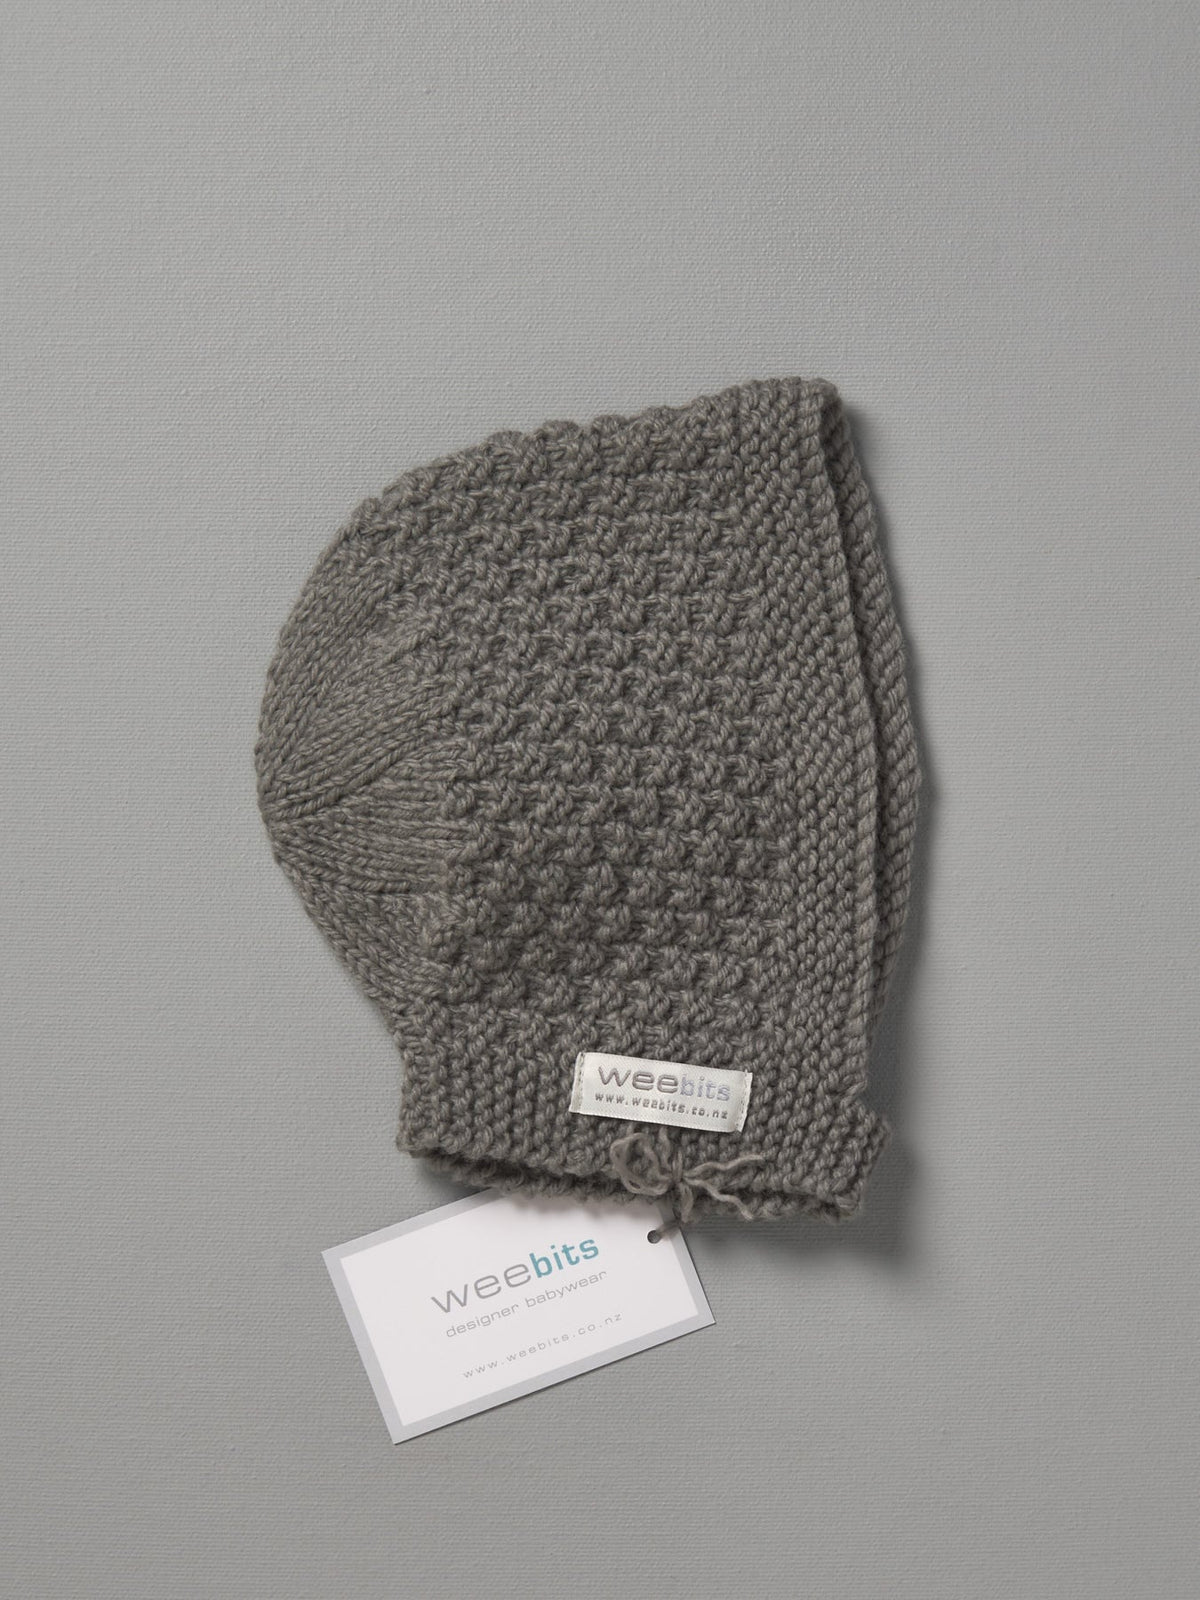 A grey Hand Knitted Baby Bonnet - Mushroom with a tag on it. (Brand: Weebits)